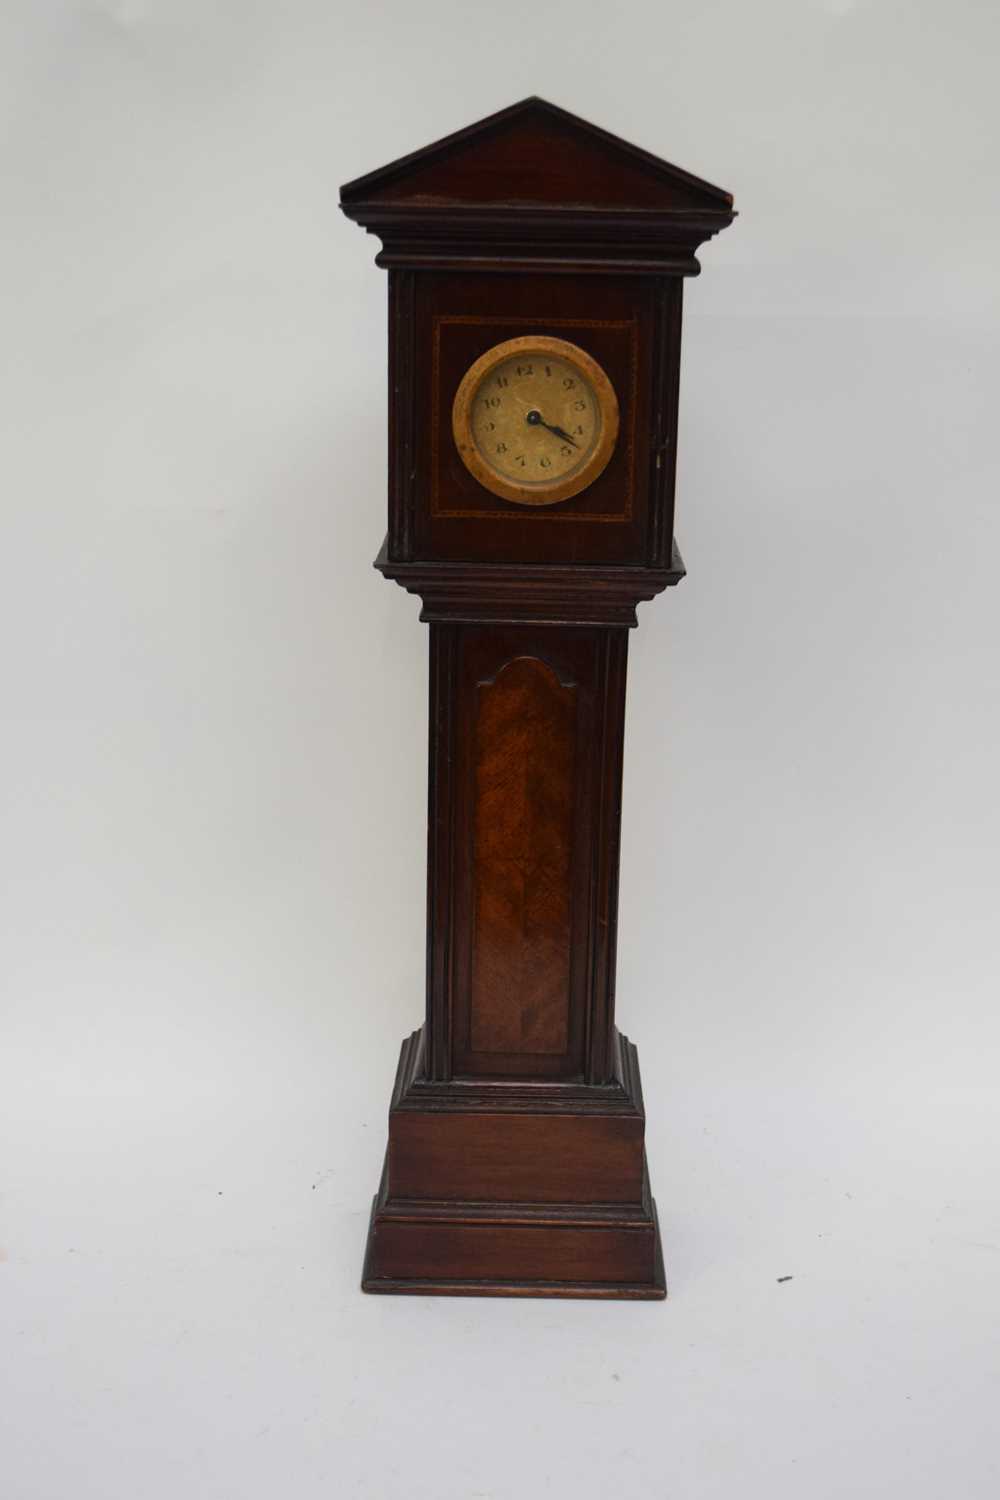 Late 19th/early 20th century miniature longcase clock in architectural case fitted with a keyless